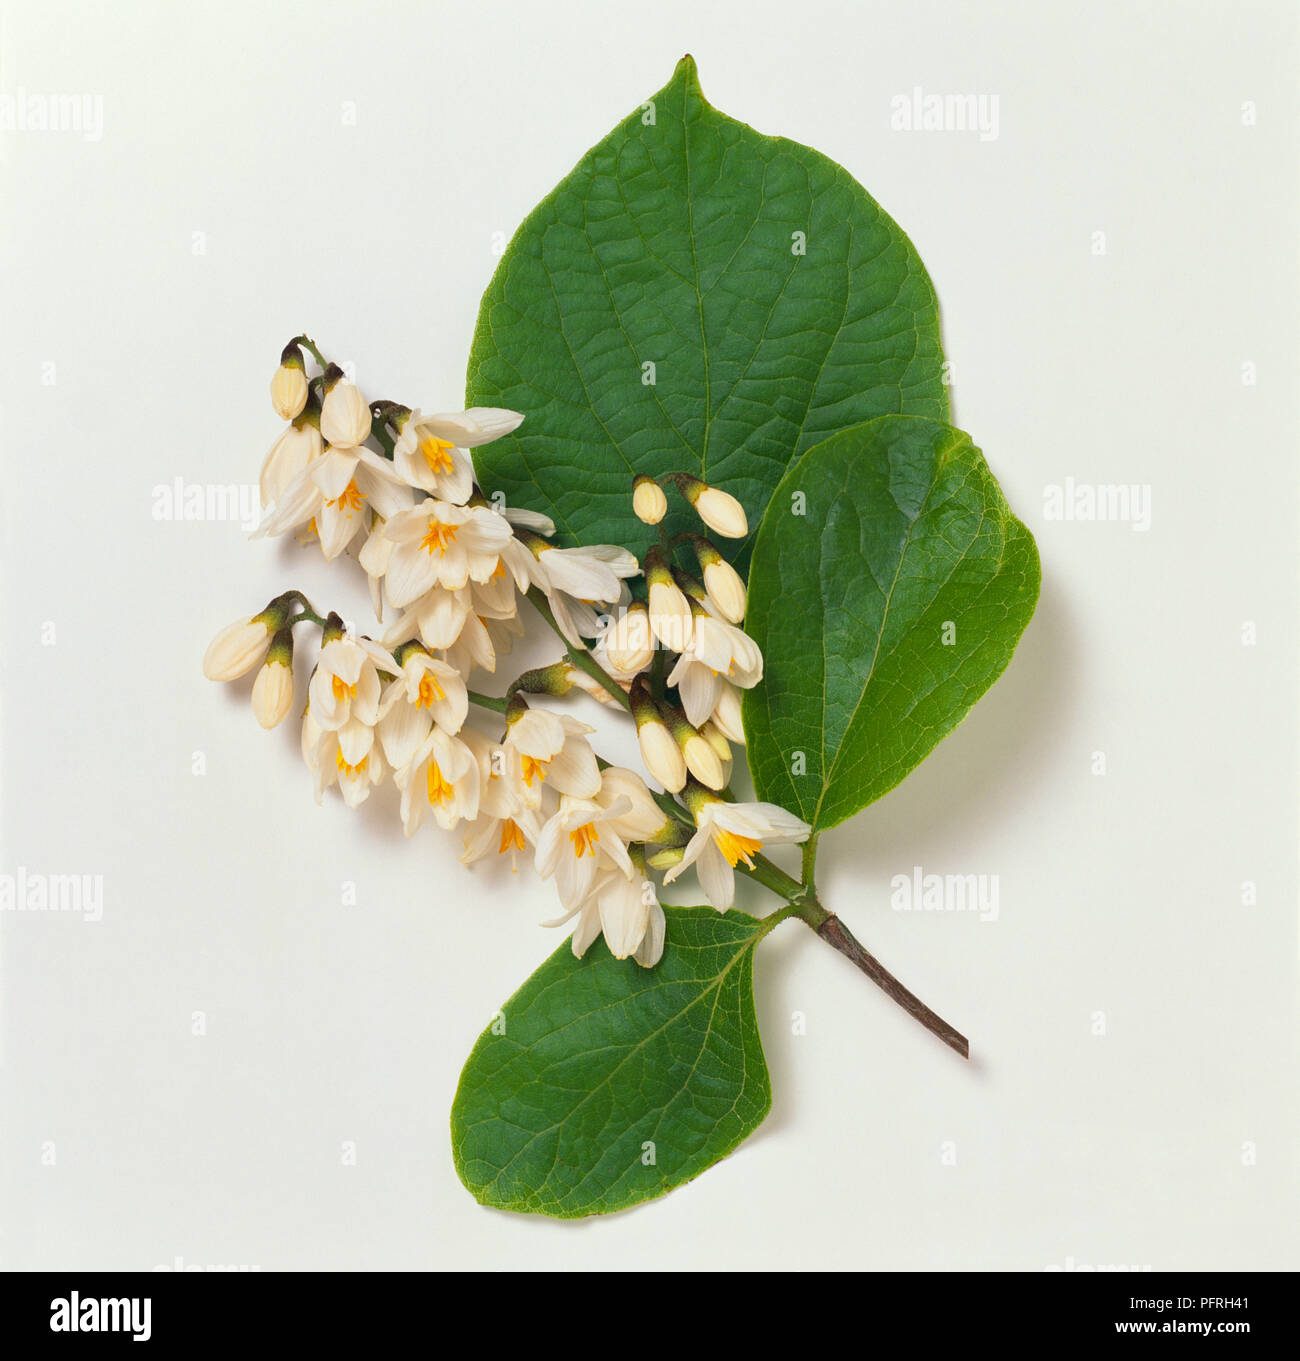 Styrax hemsleyana (Snowbell), stem with leaves and cluster of white flowers Stock Photo